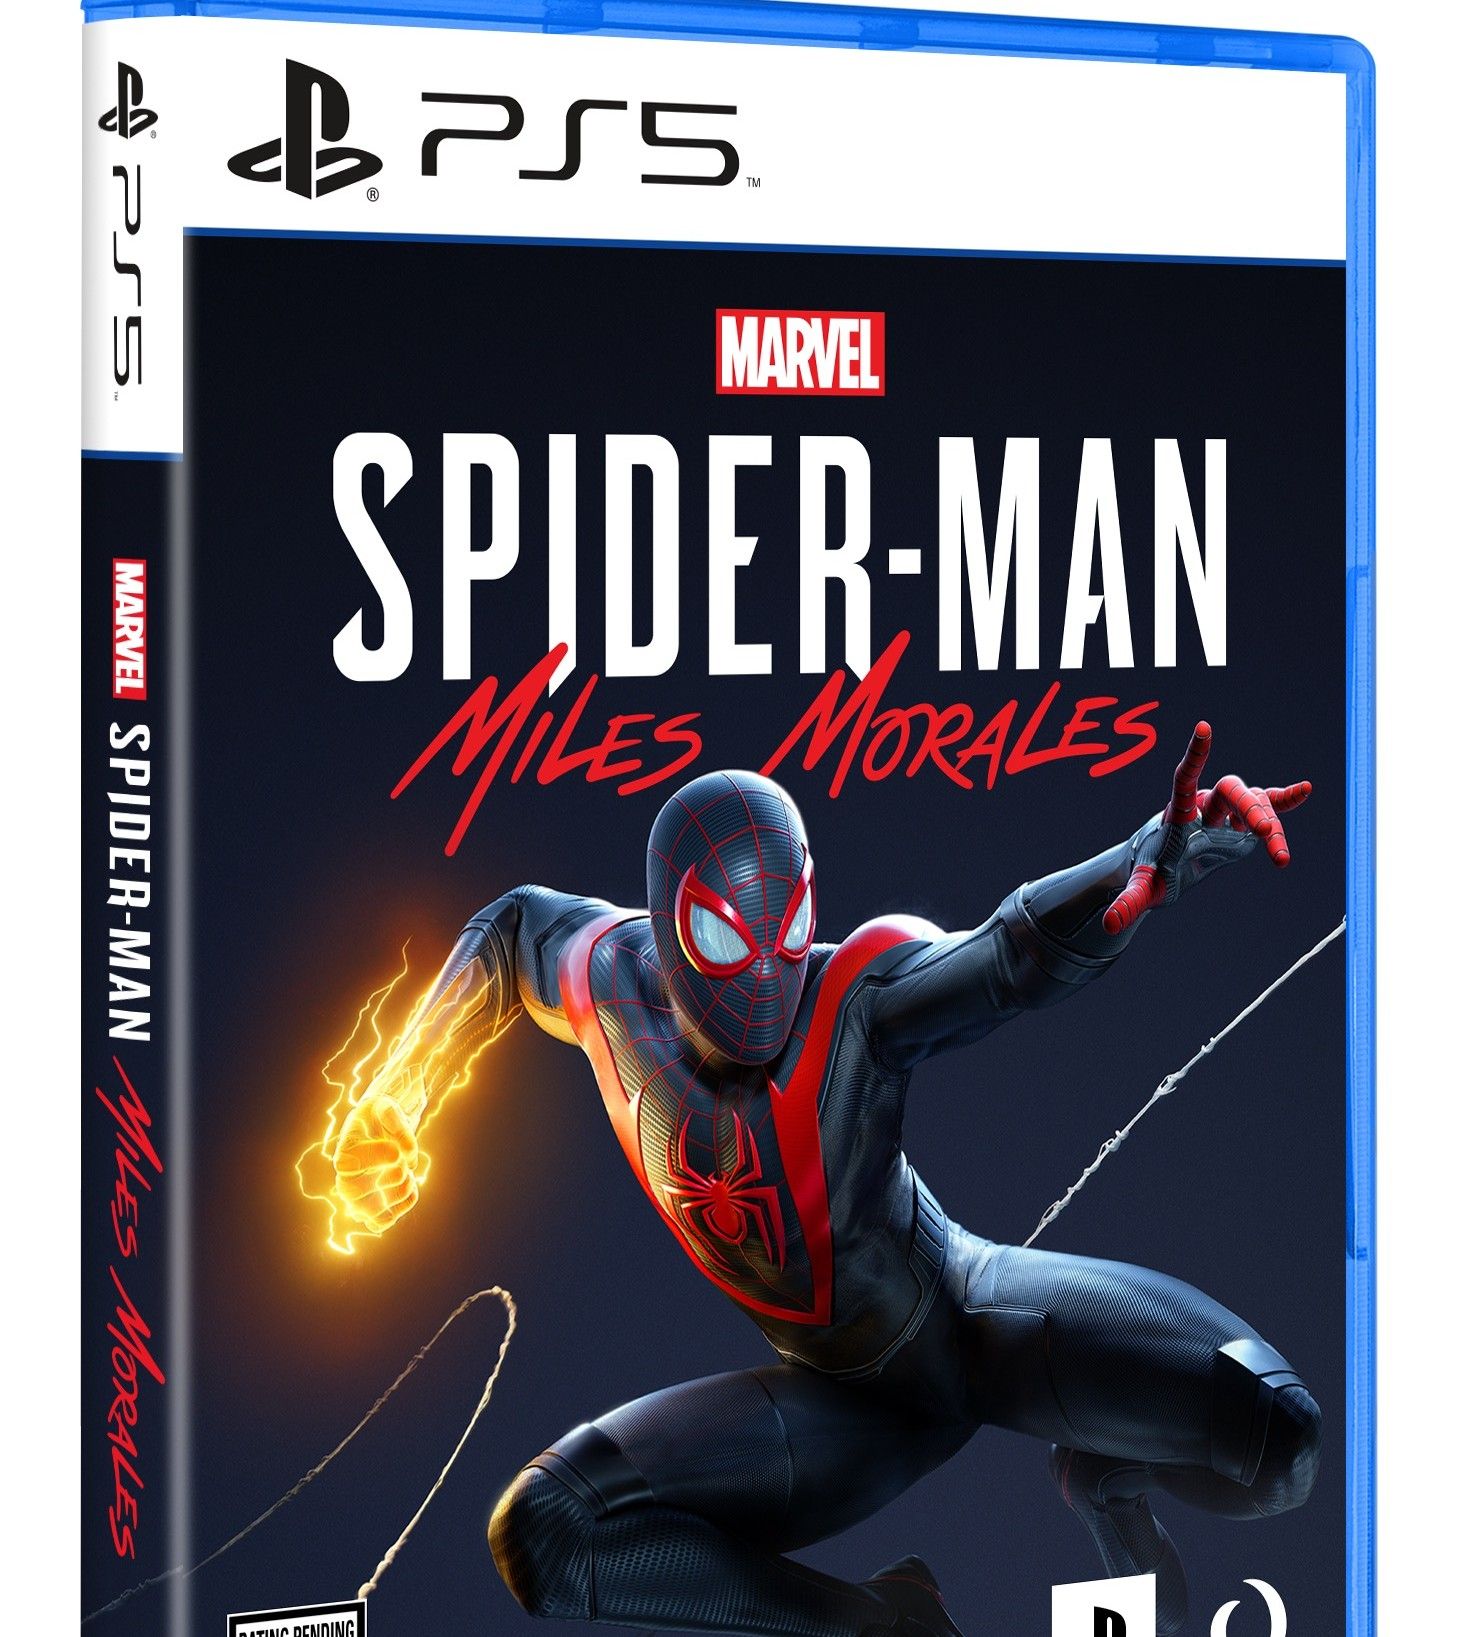 PS5 miles morales game cover vertical